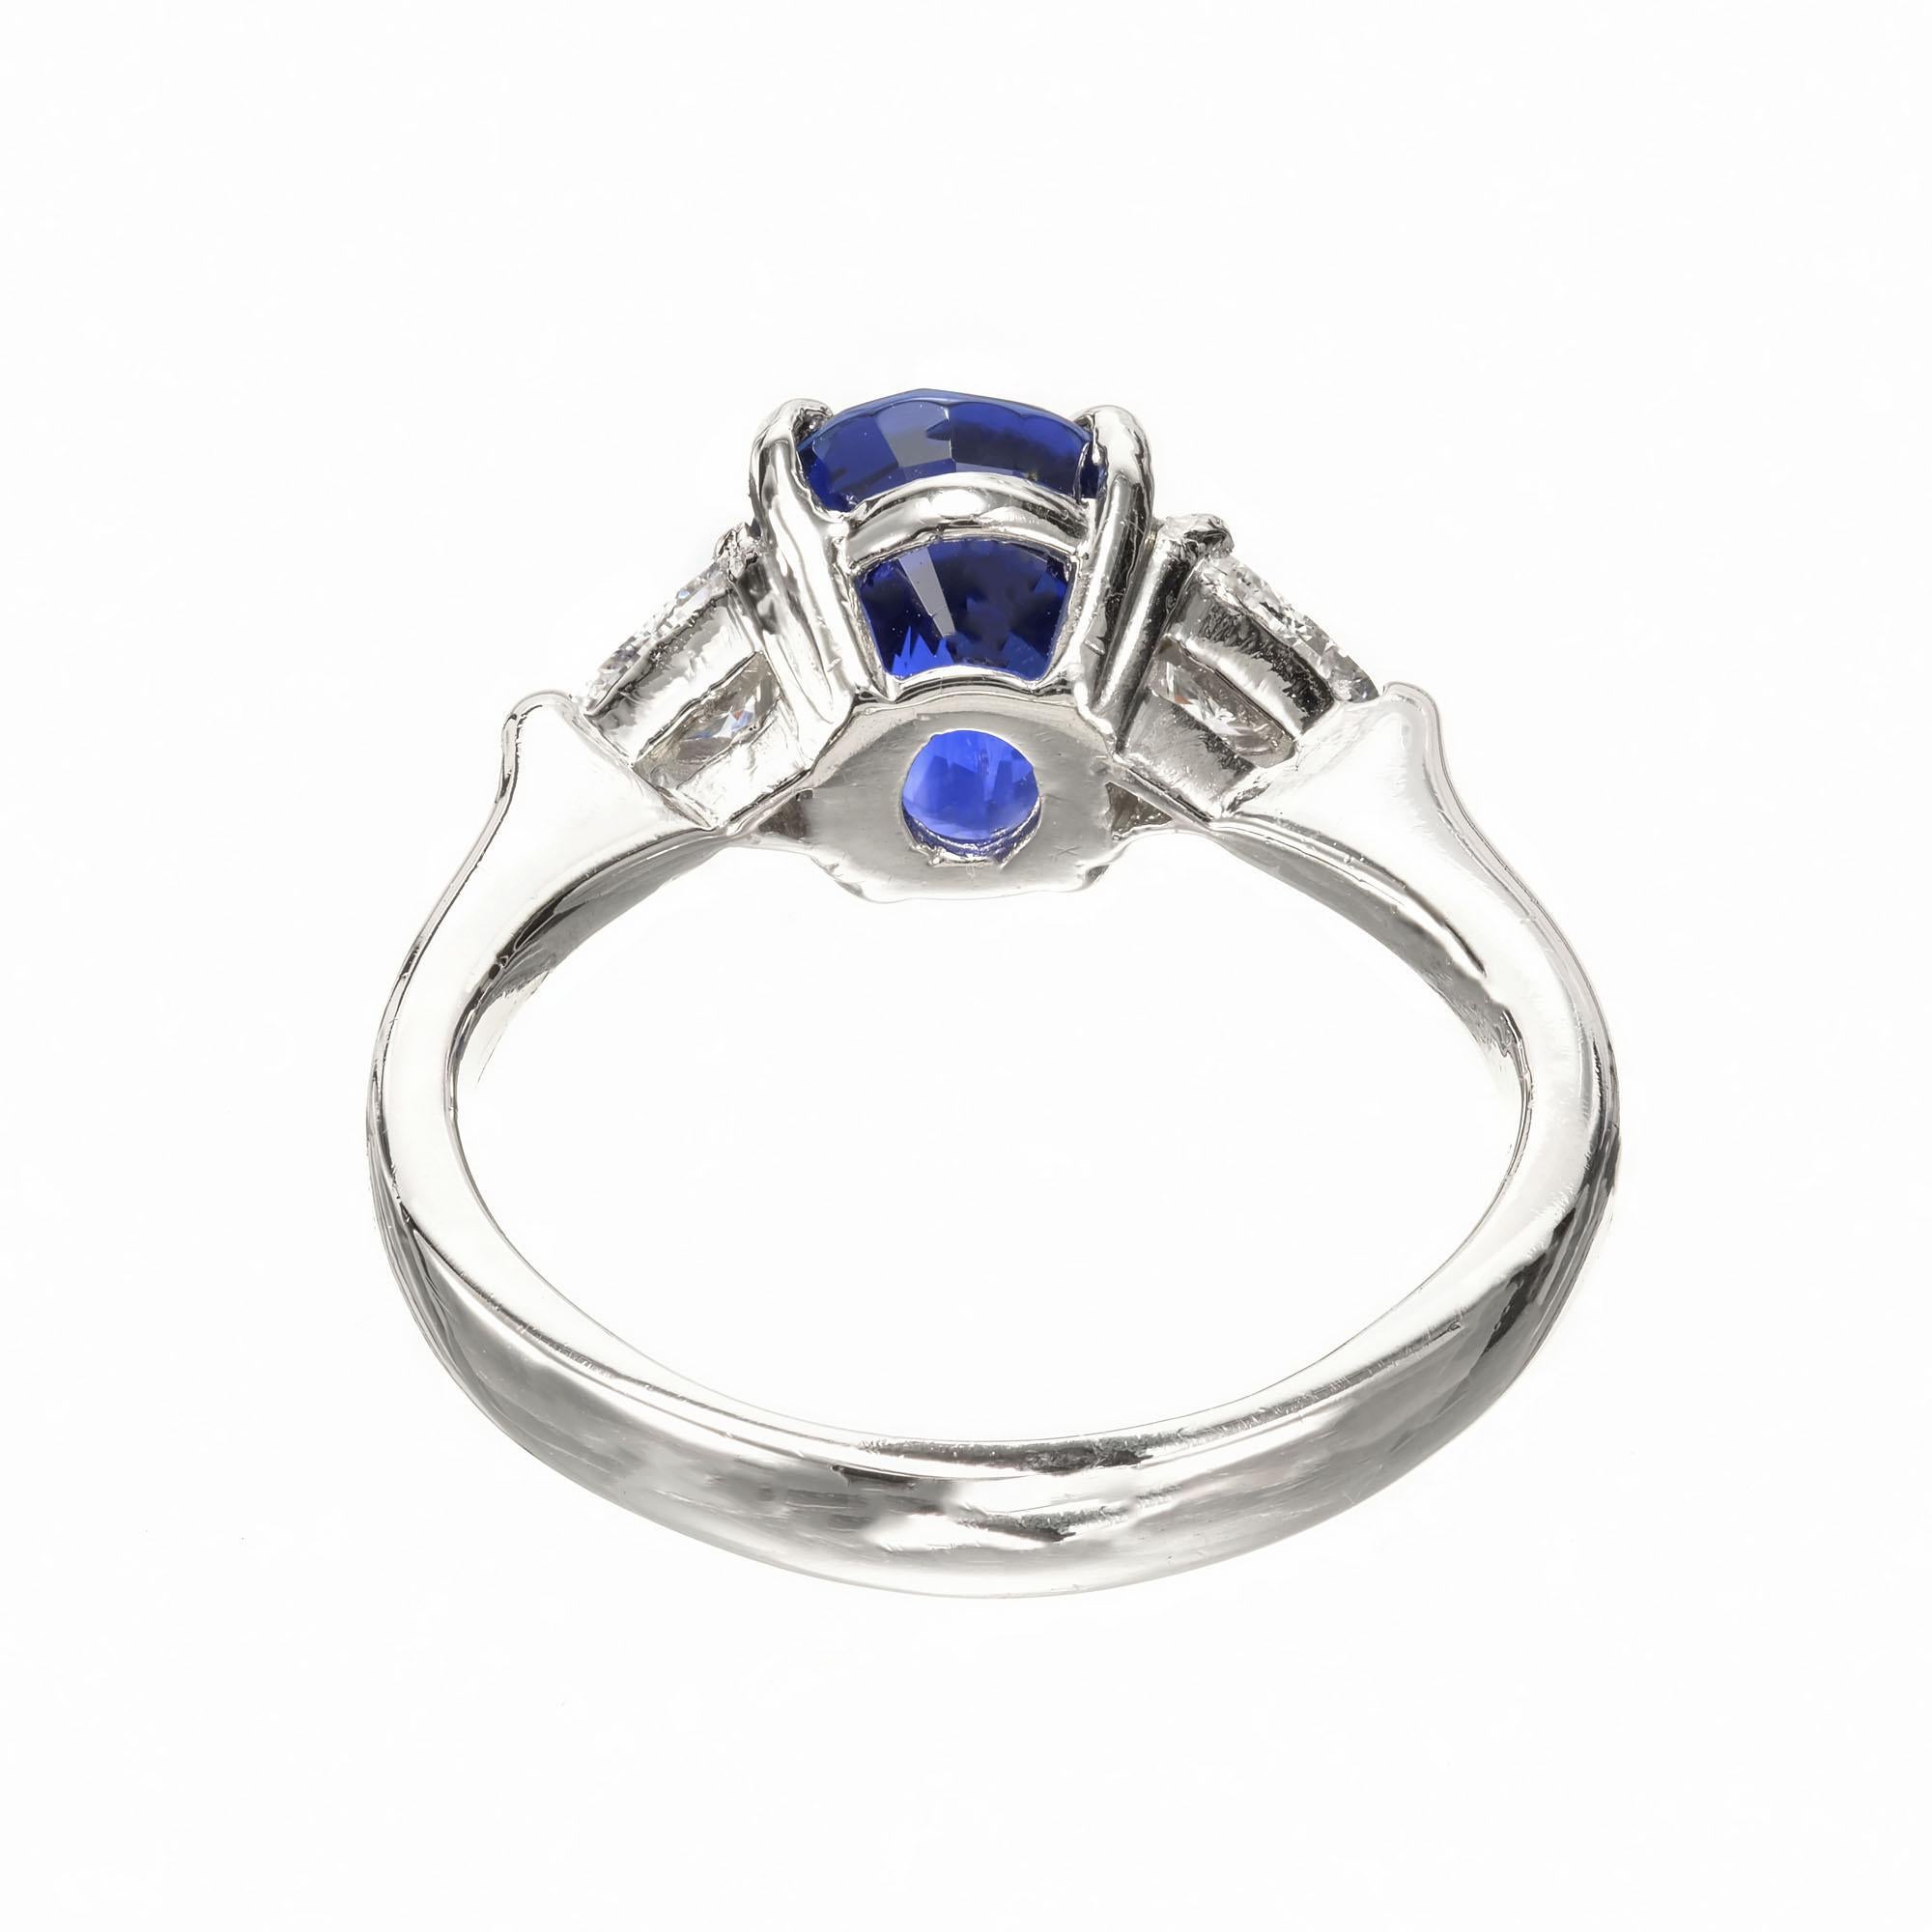 3.18 Carat Blue Sapphire Diamond Platinum Three-Stone Engagement Ring In Excellent Condition For Sale In Stamford, CT